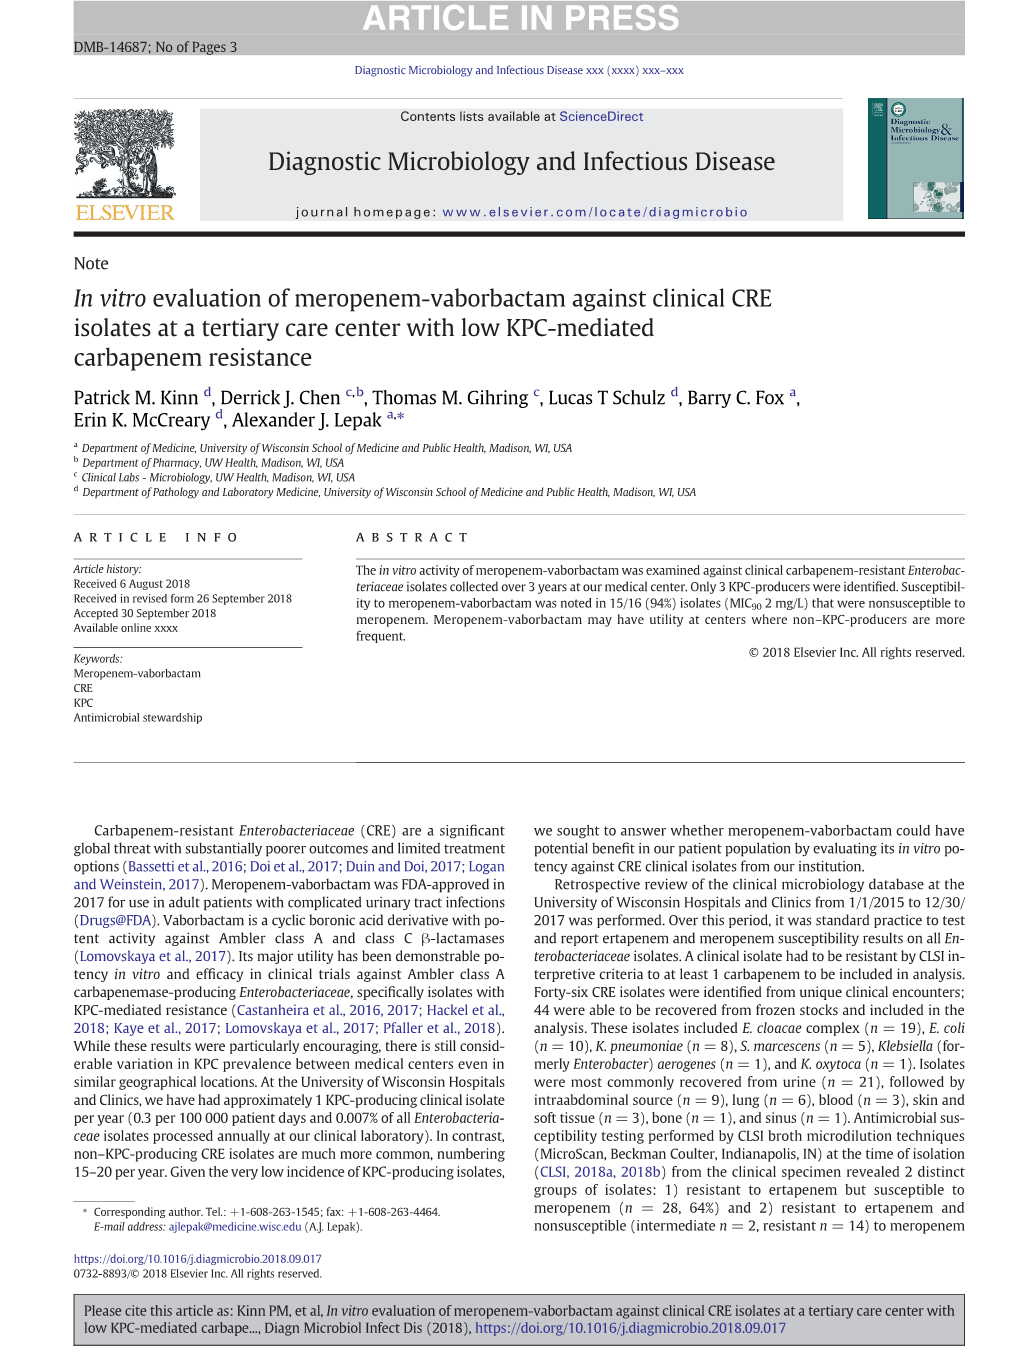 In Vitro Evaluation of Meropenem-Vaborbactam Against Clinical CRE Isolates at a Tertiary Care Center with Low KPC-Mediated Carbapenem Resistance